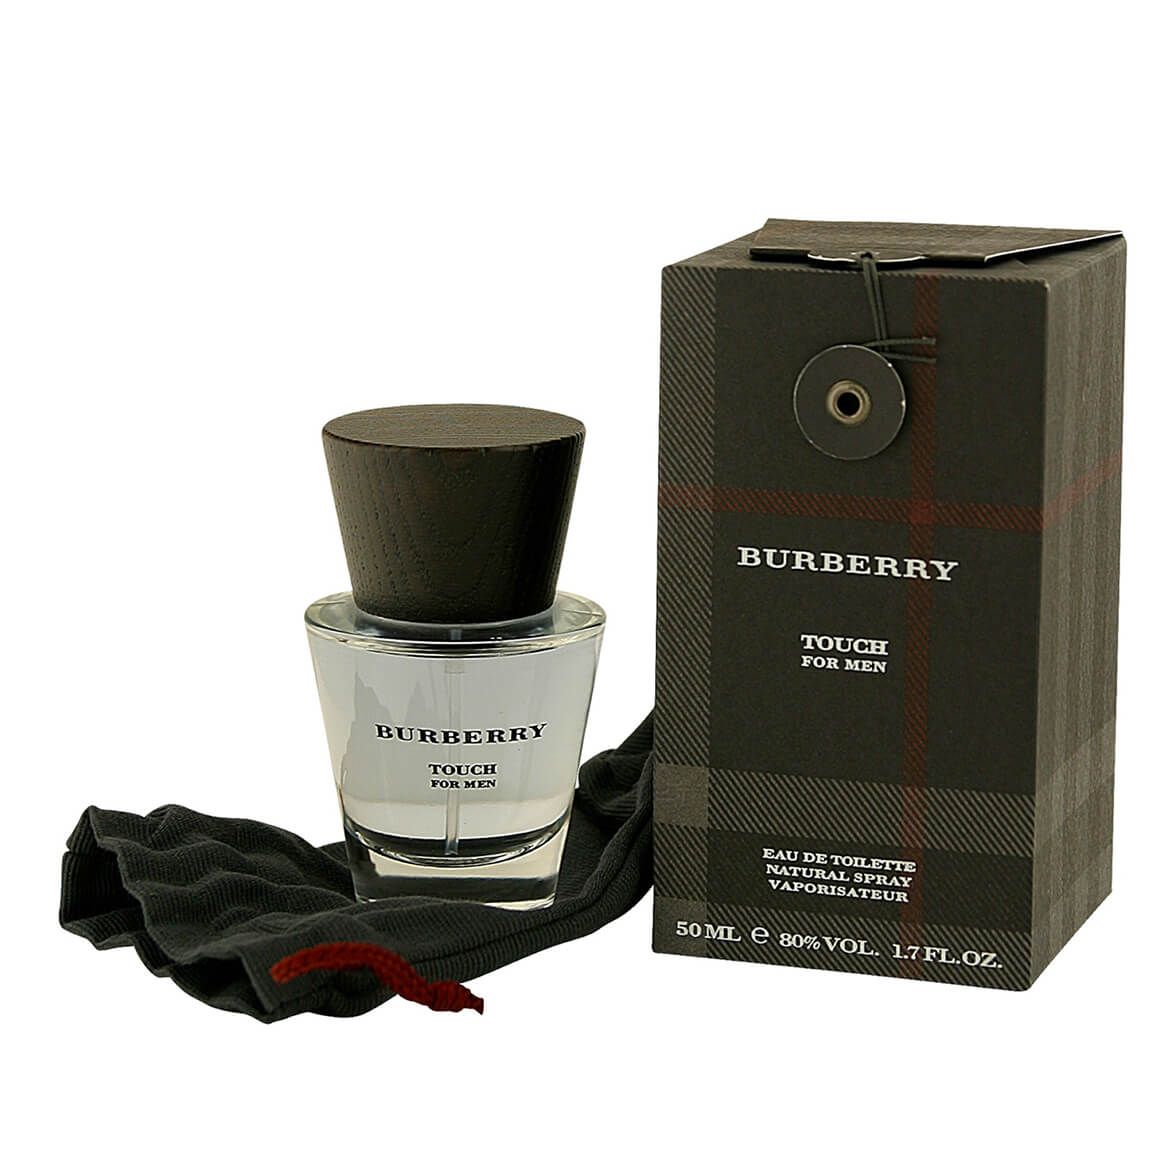 Burberry Touch for Men EDT, 1.7 oz. + '-' + 366804